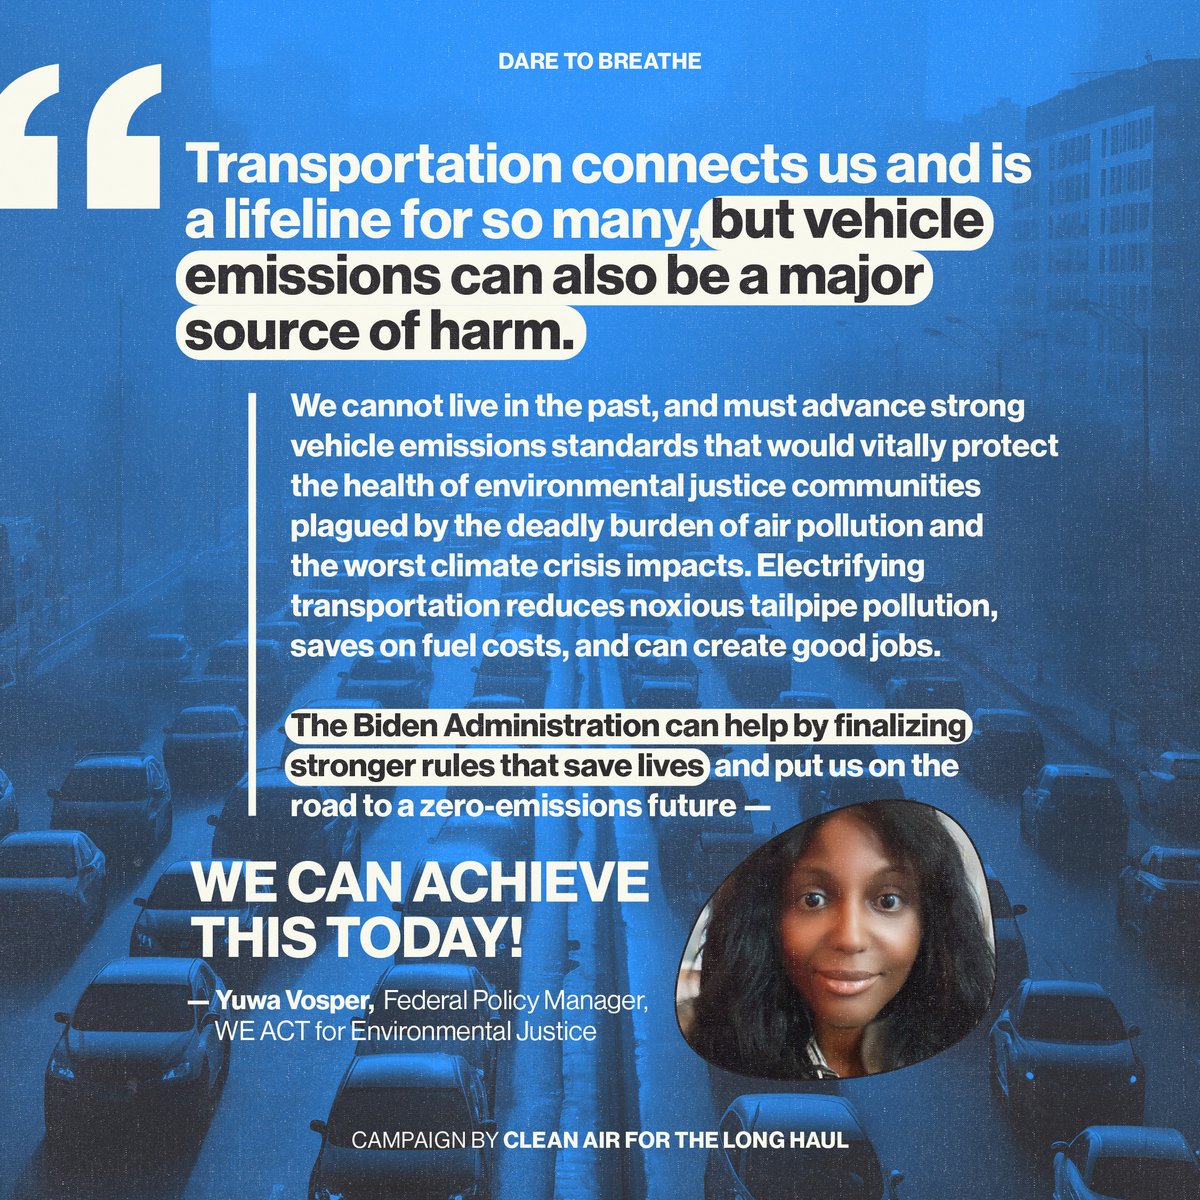 Transportation connects us, but vehicle emissions harm us, stealing our futures. Fighting for strong rules to save lives and protect communities, especially in Black, Brown, and low-income areas choked by pollution. It’s time to deliver on life-saving standards.
#DareToBreathe